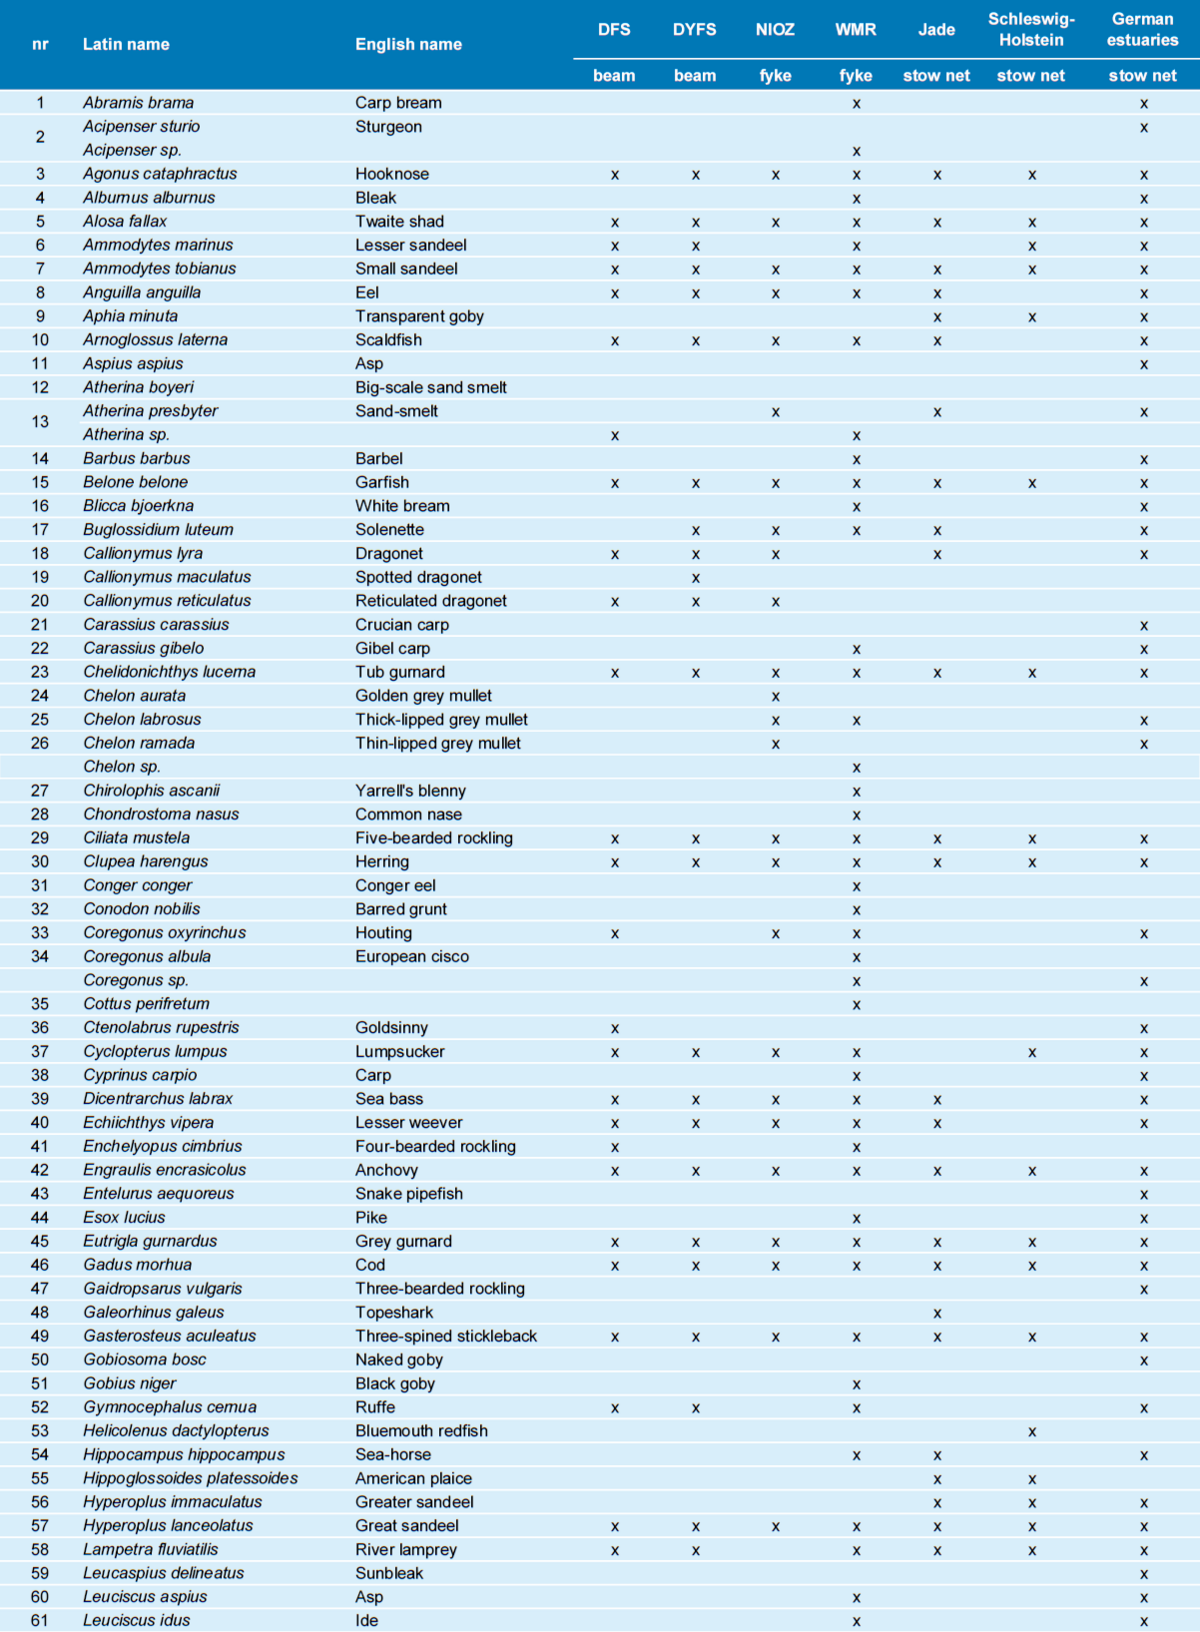 Table 3. Species list by survey for the period 2011-2020. Common names are missing for species groups that were identified to genus level only in specific programmes.